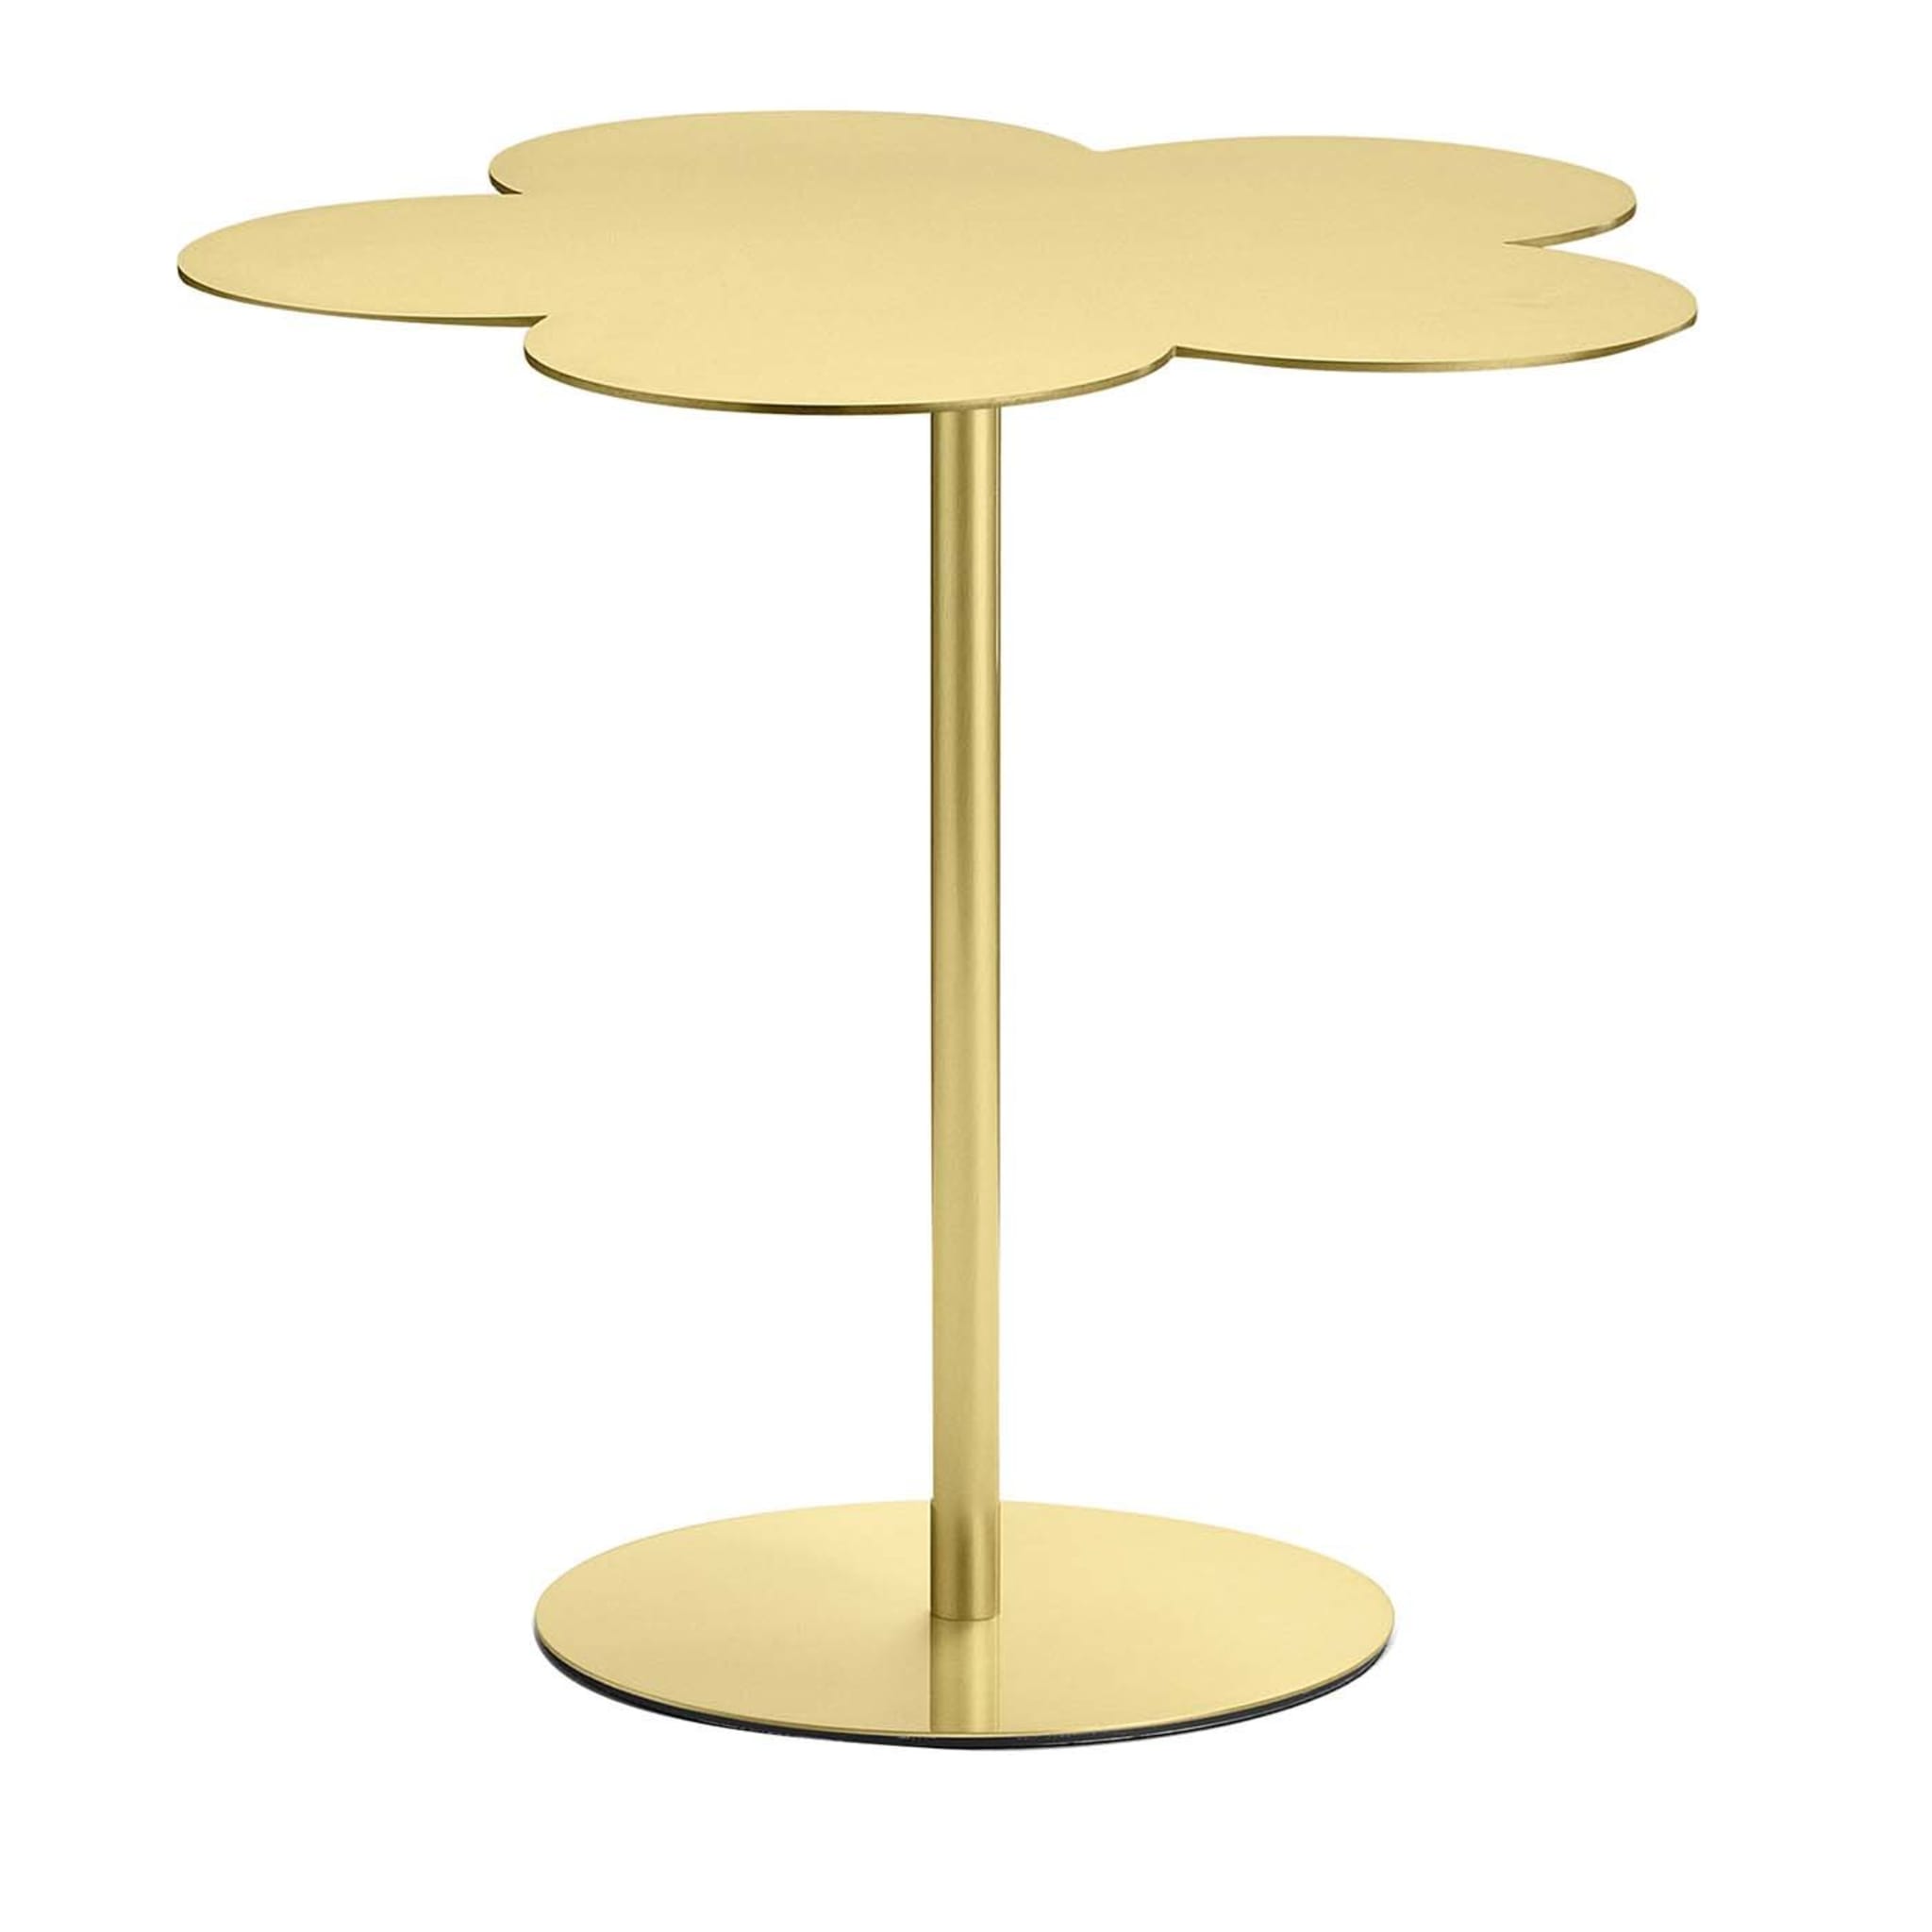 Flowers Large Brass Side Table by Stefano Giovannoni - Main view